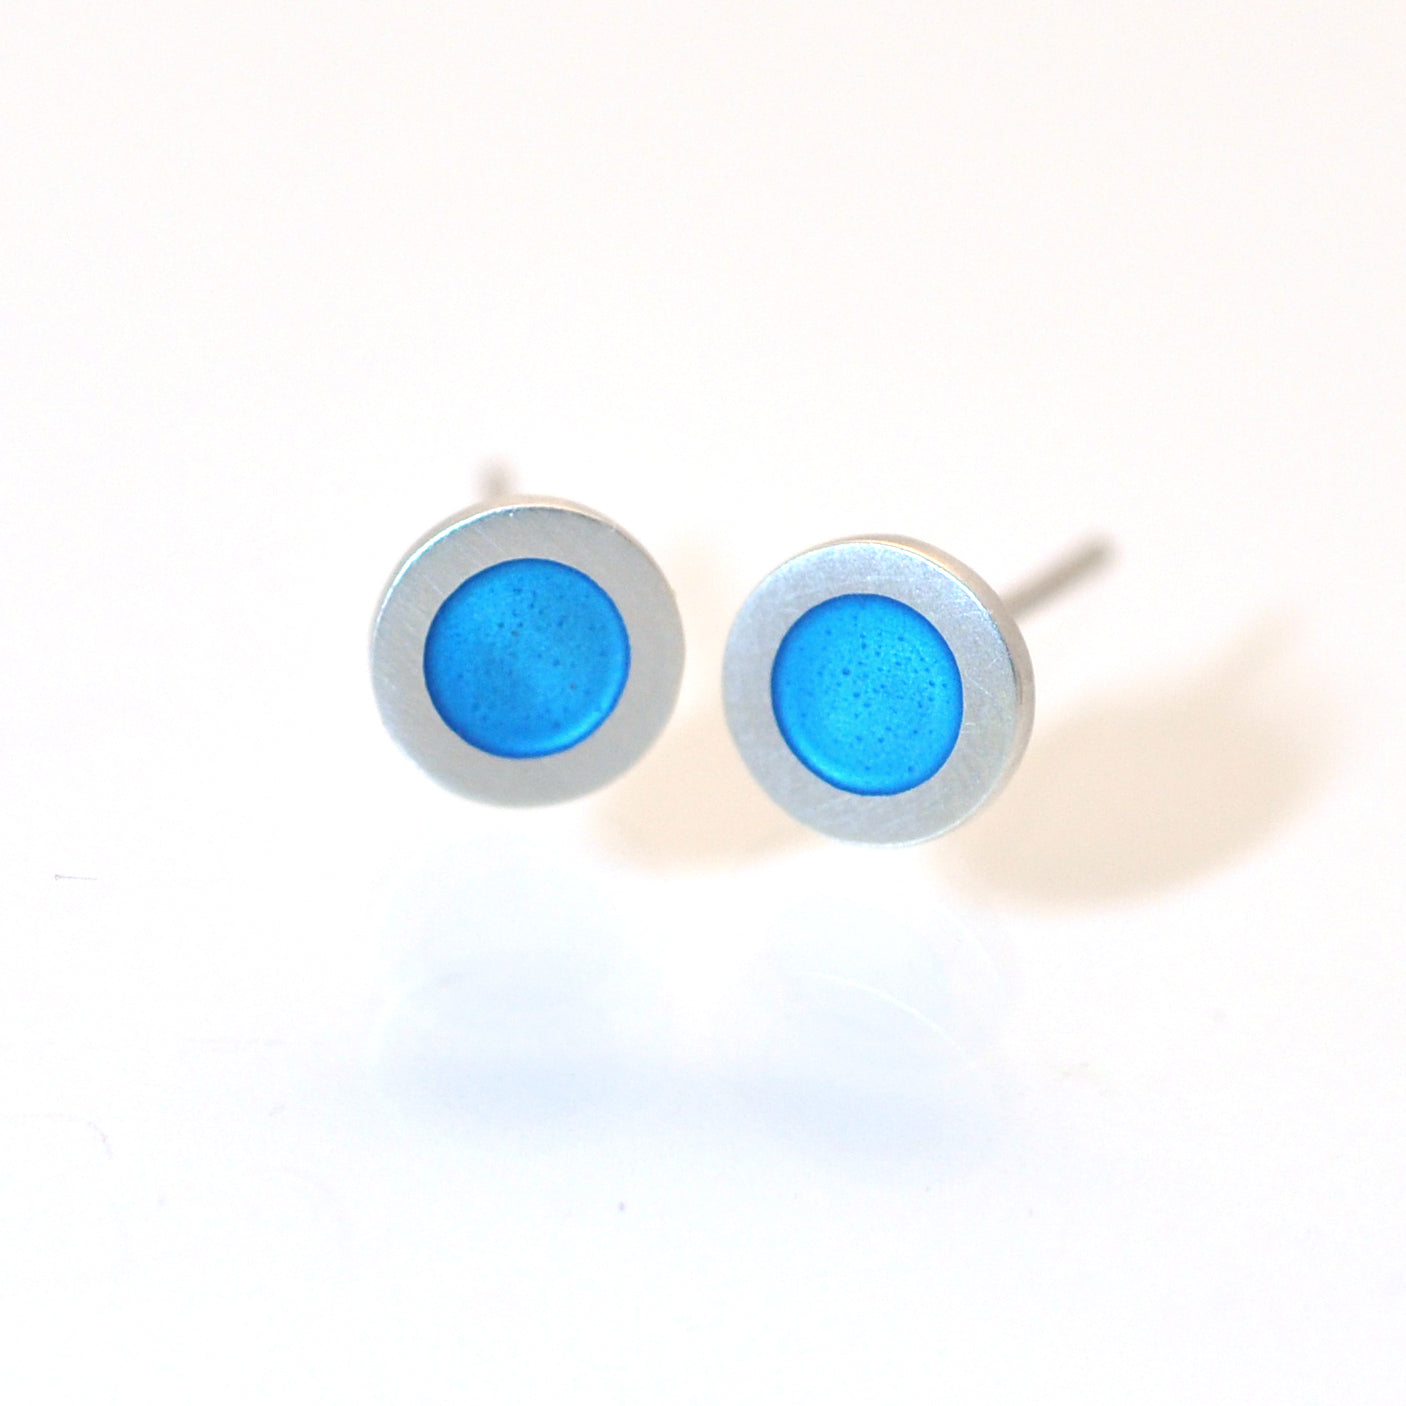 Small flat round ear studs with blue turquoise coloured enamel in the centre